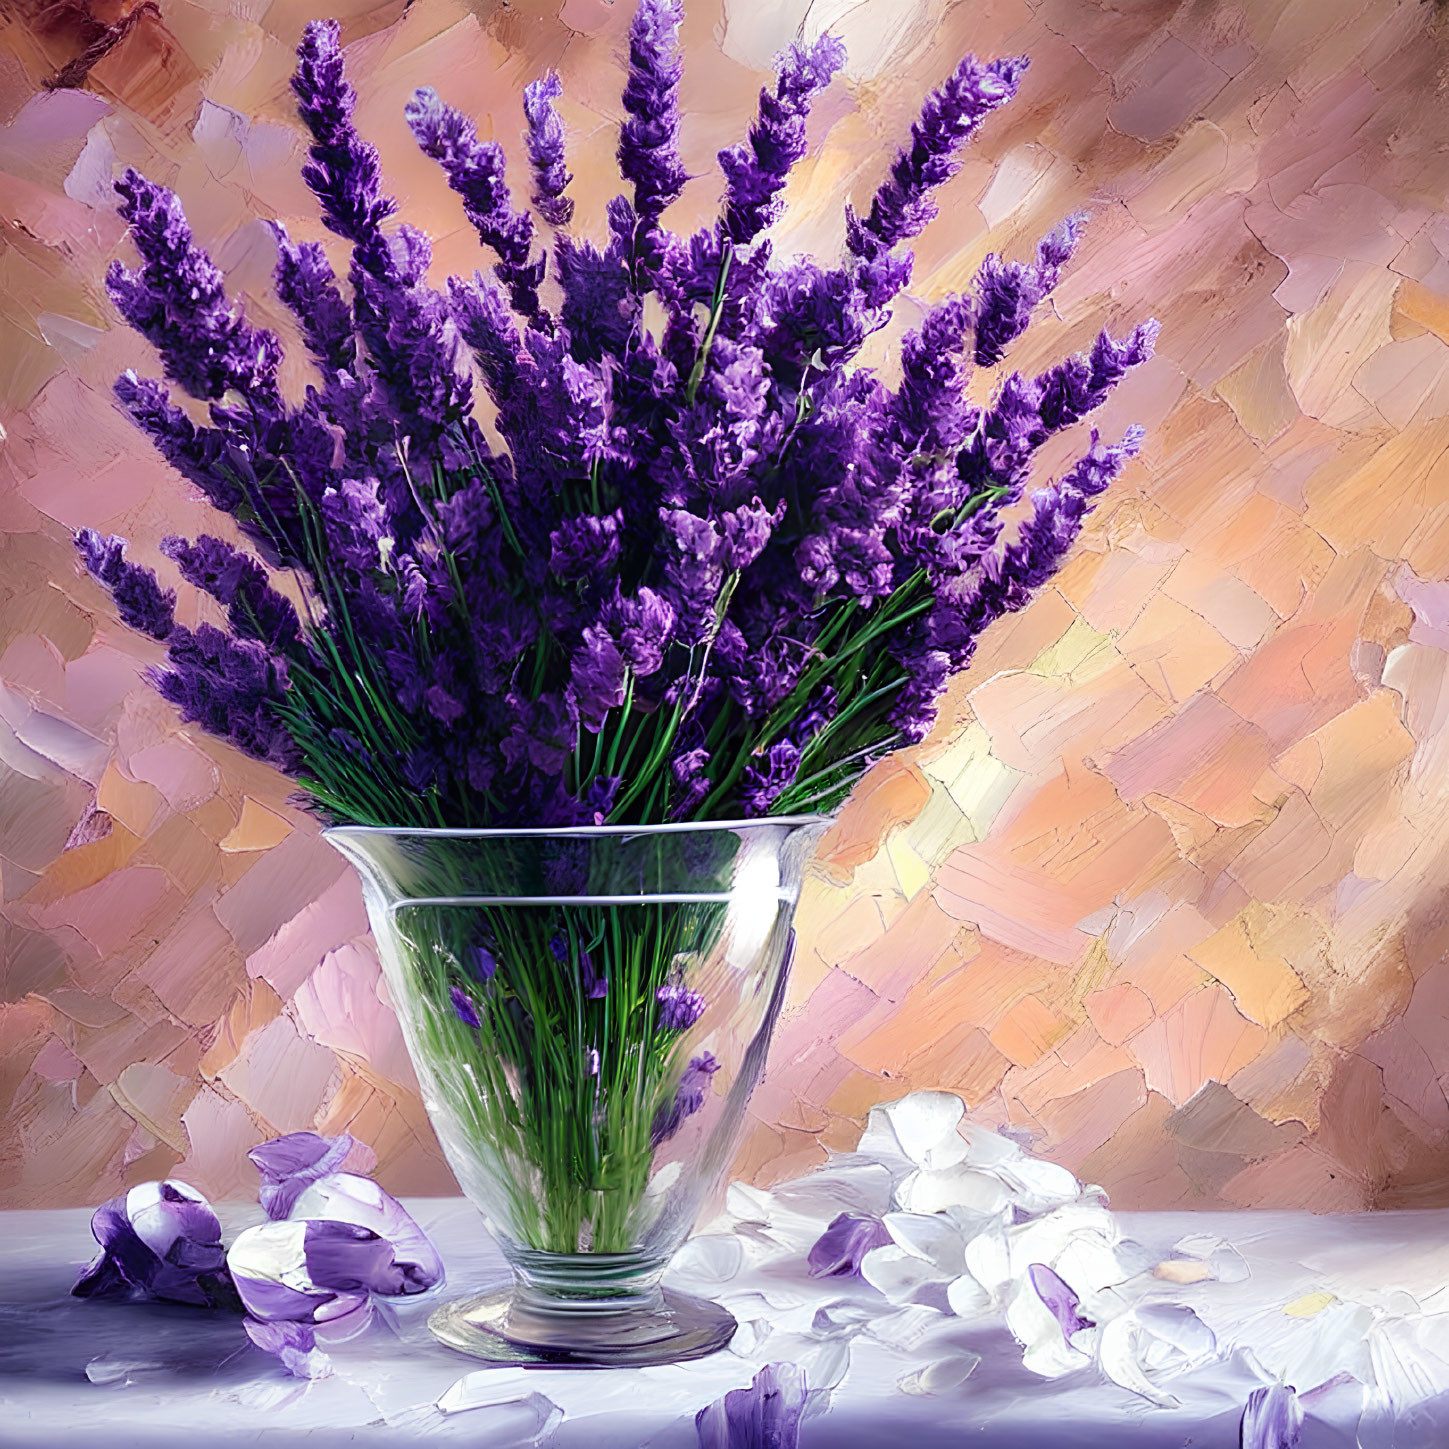 Purple lavender bouquet in clear glass vase on pastel background